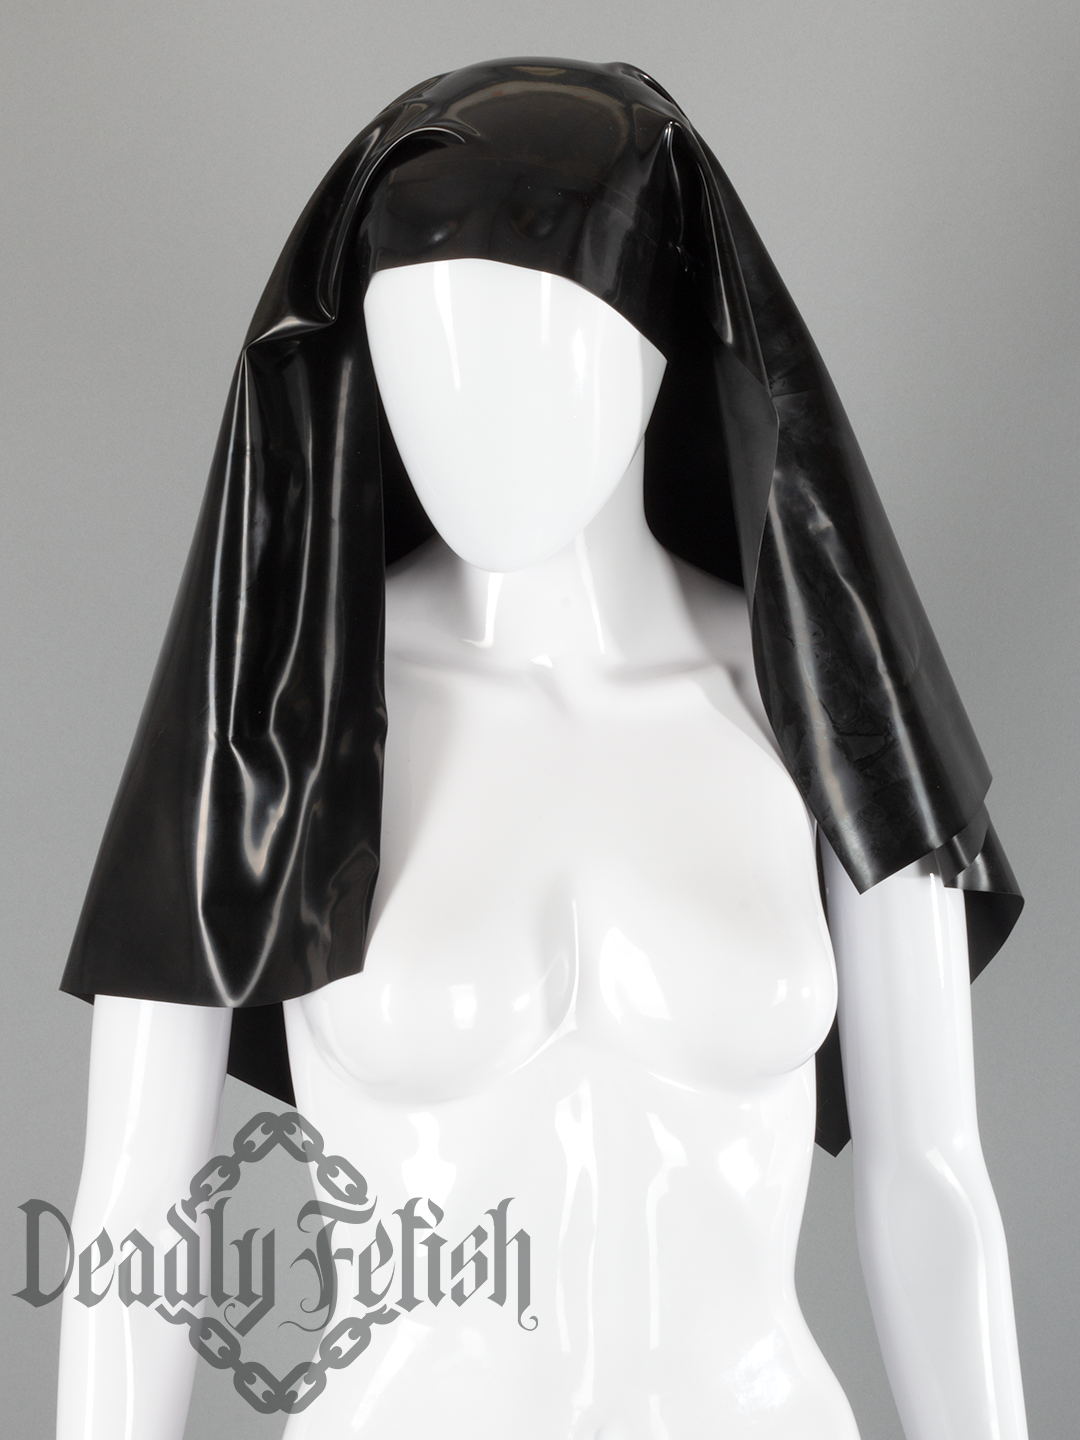 Deadly Fetish Made-To-Order Latex: Nun Habit